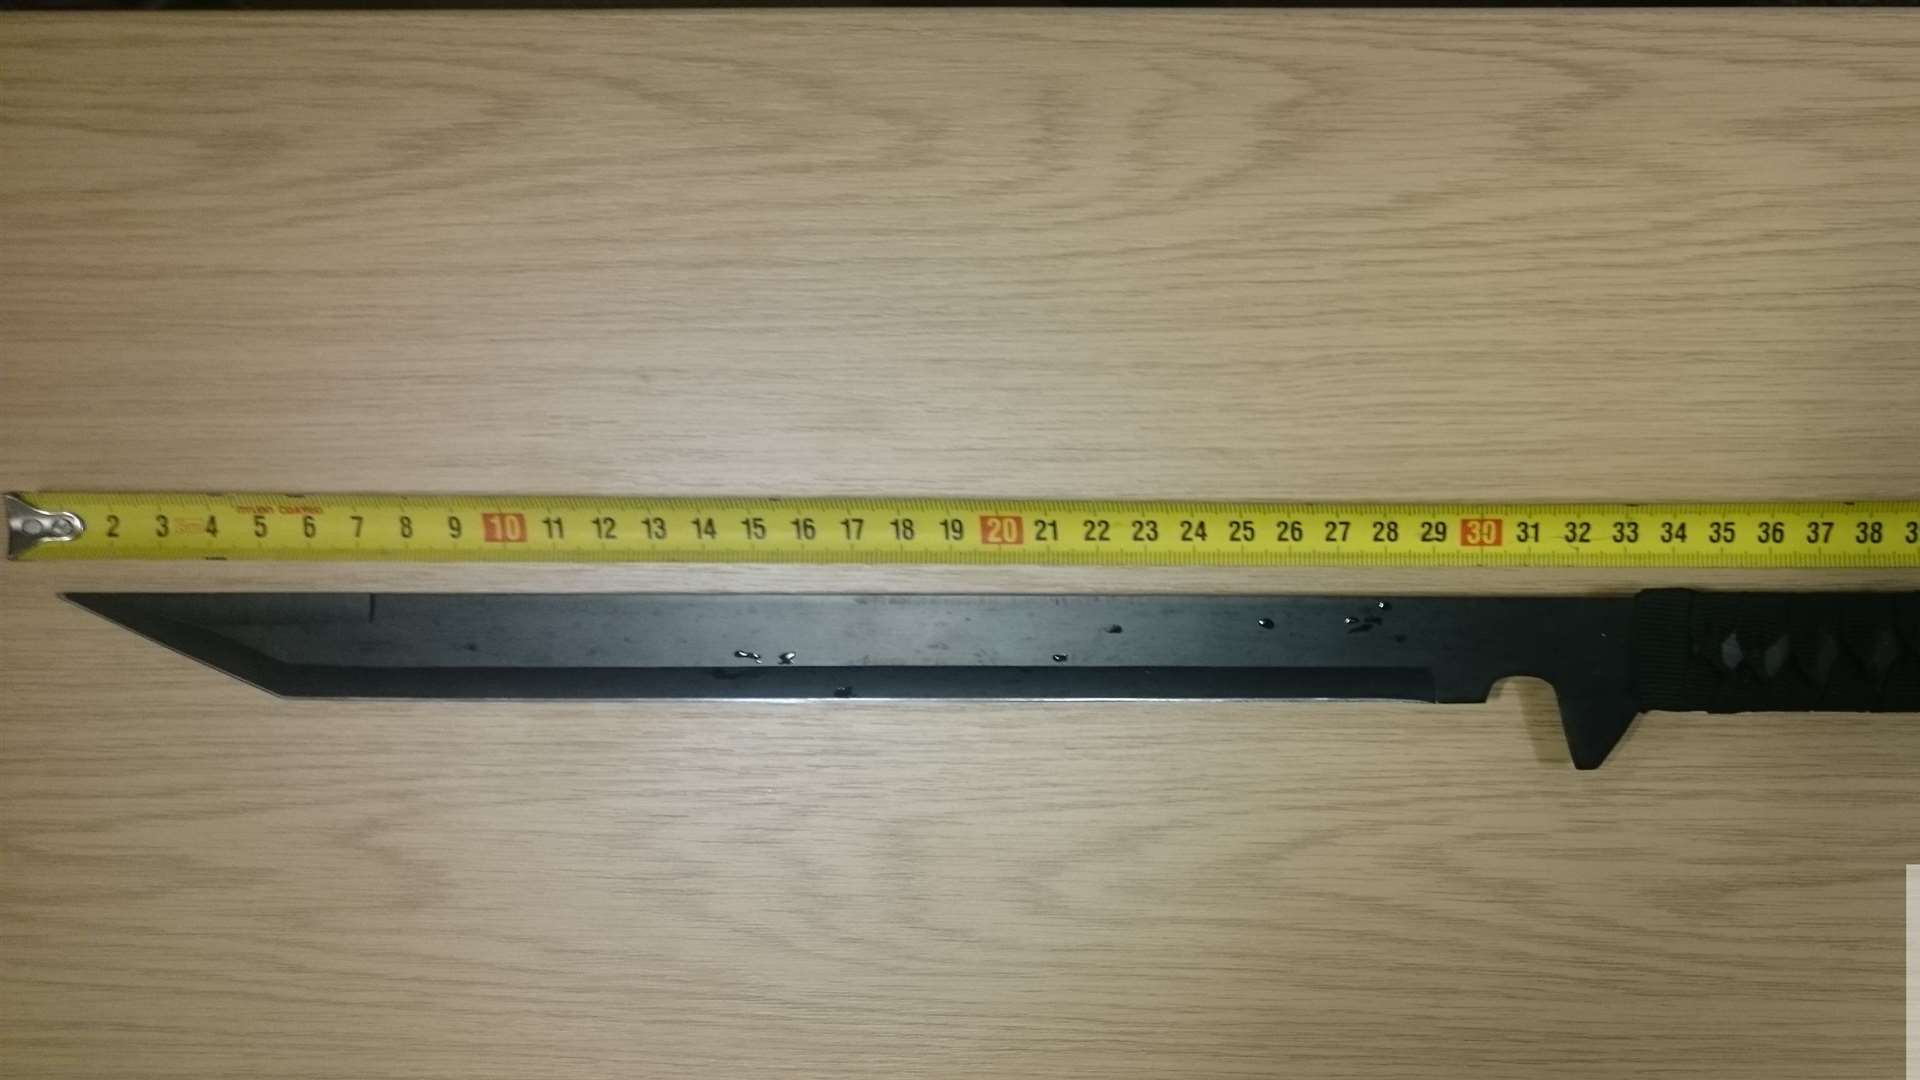 The 18-inch machete which Qadier Ghulam armed himself with.